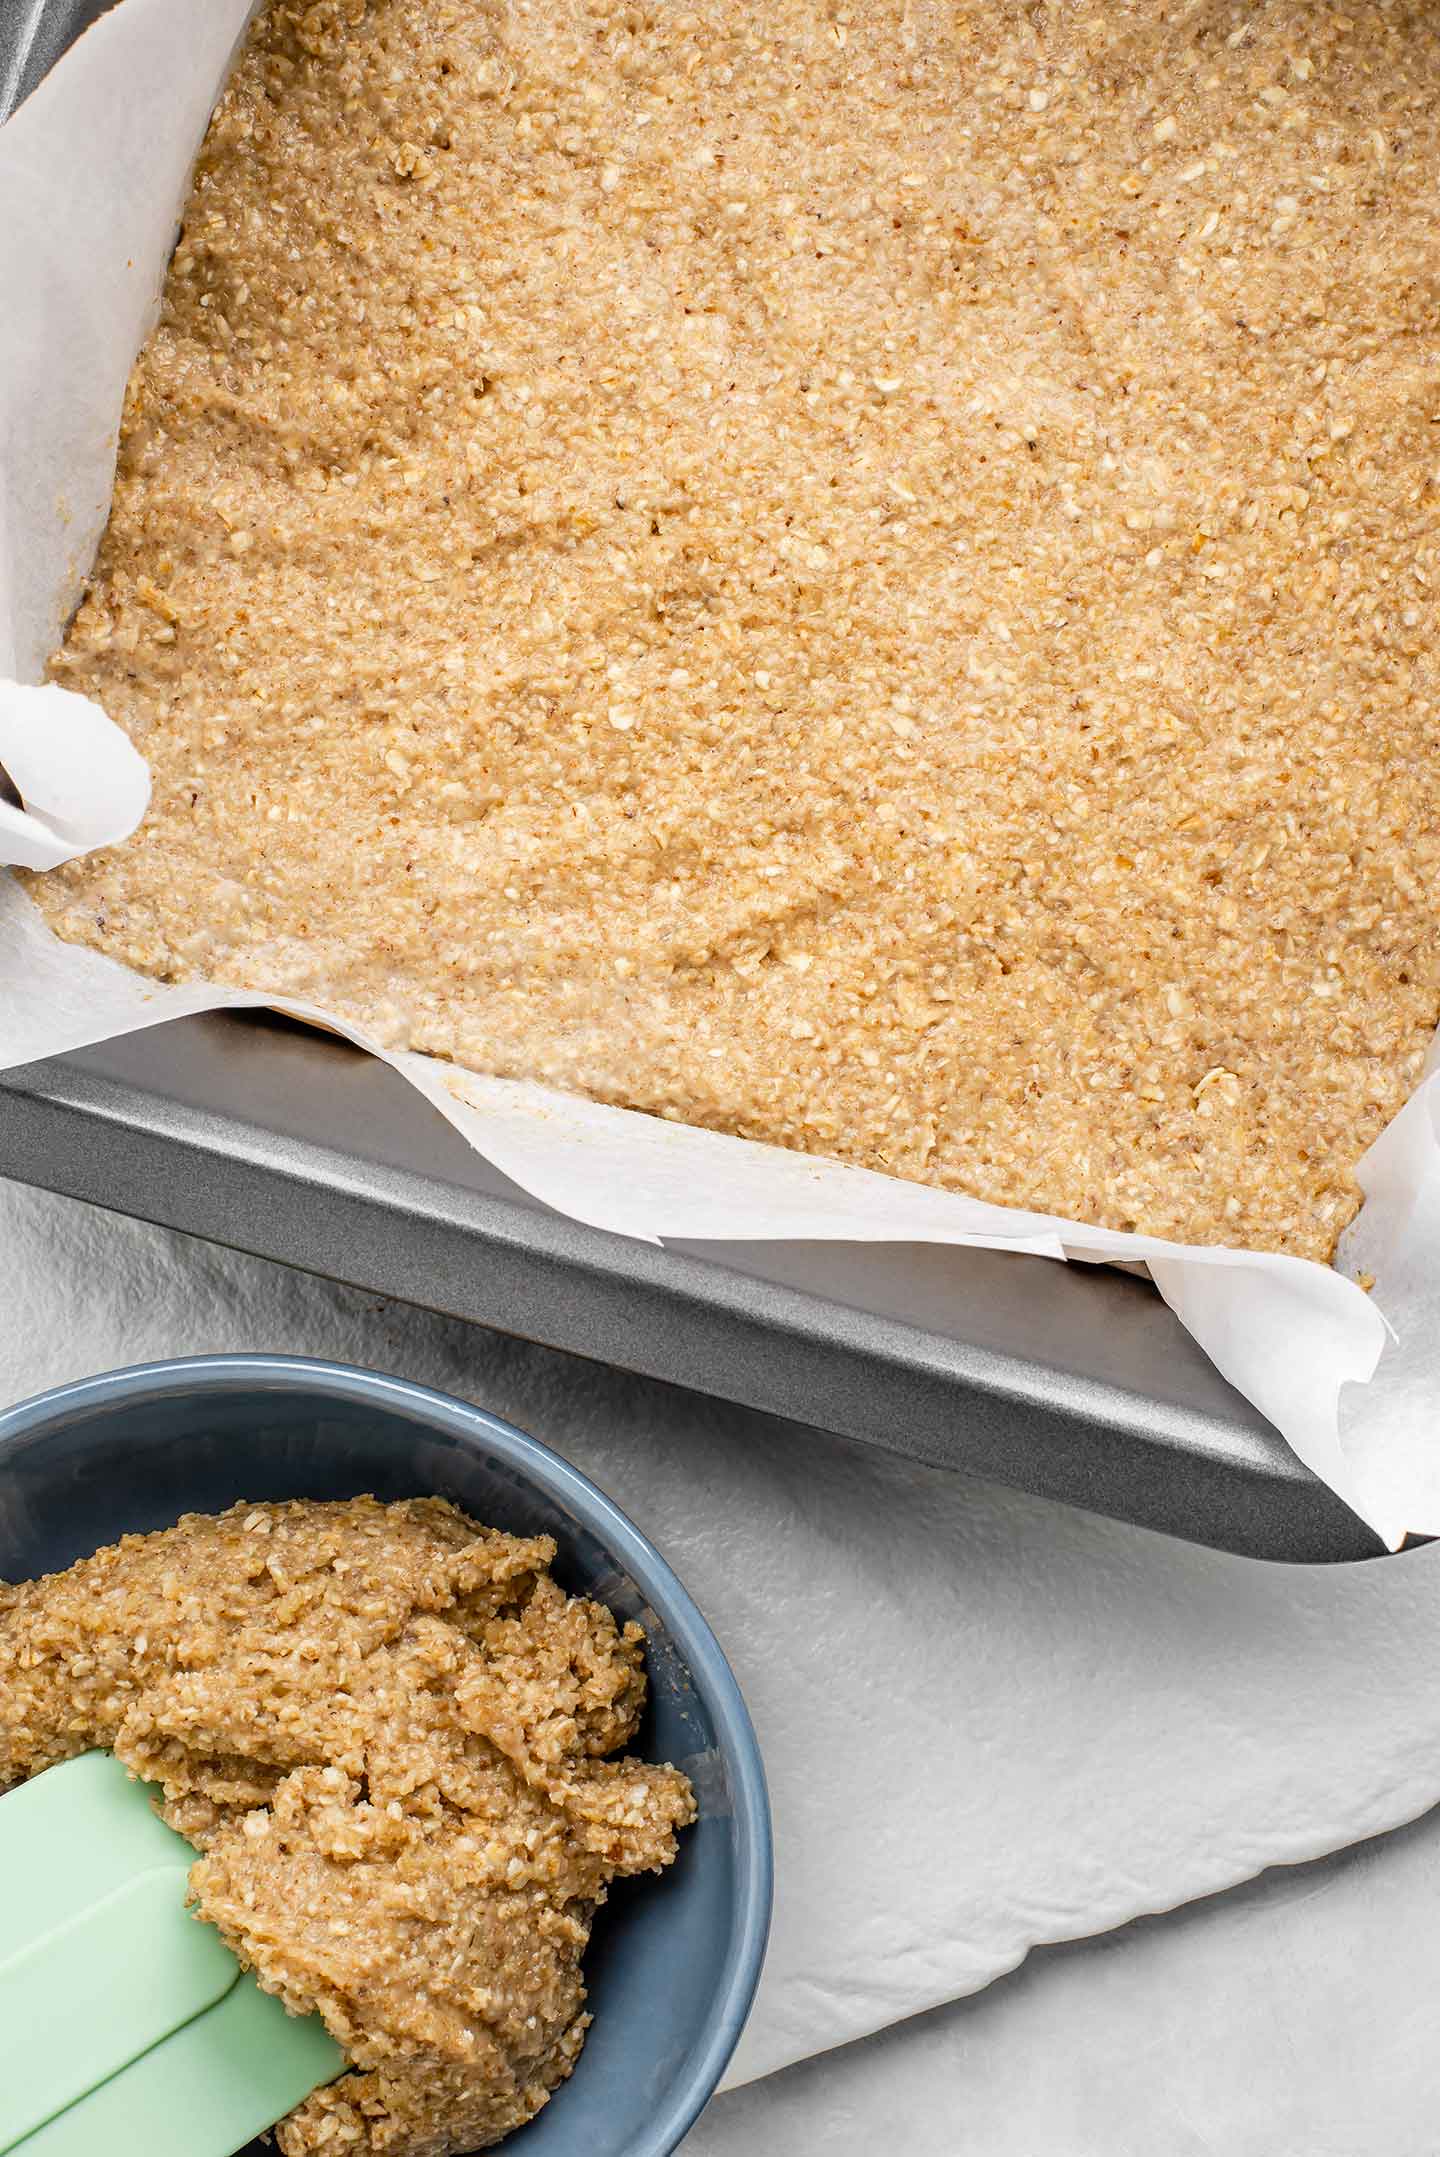 Top down view of an oat, walnut crust packed into a baking tin lined with parchment paper. A scoop of dough is reserved in a small bowl to the side.